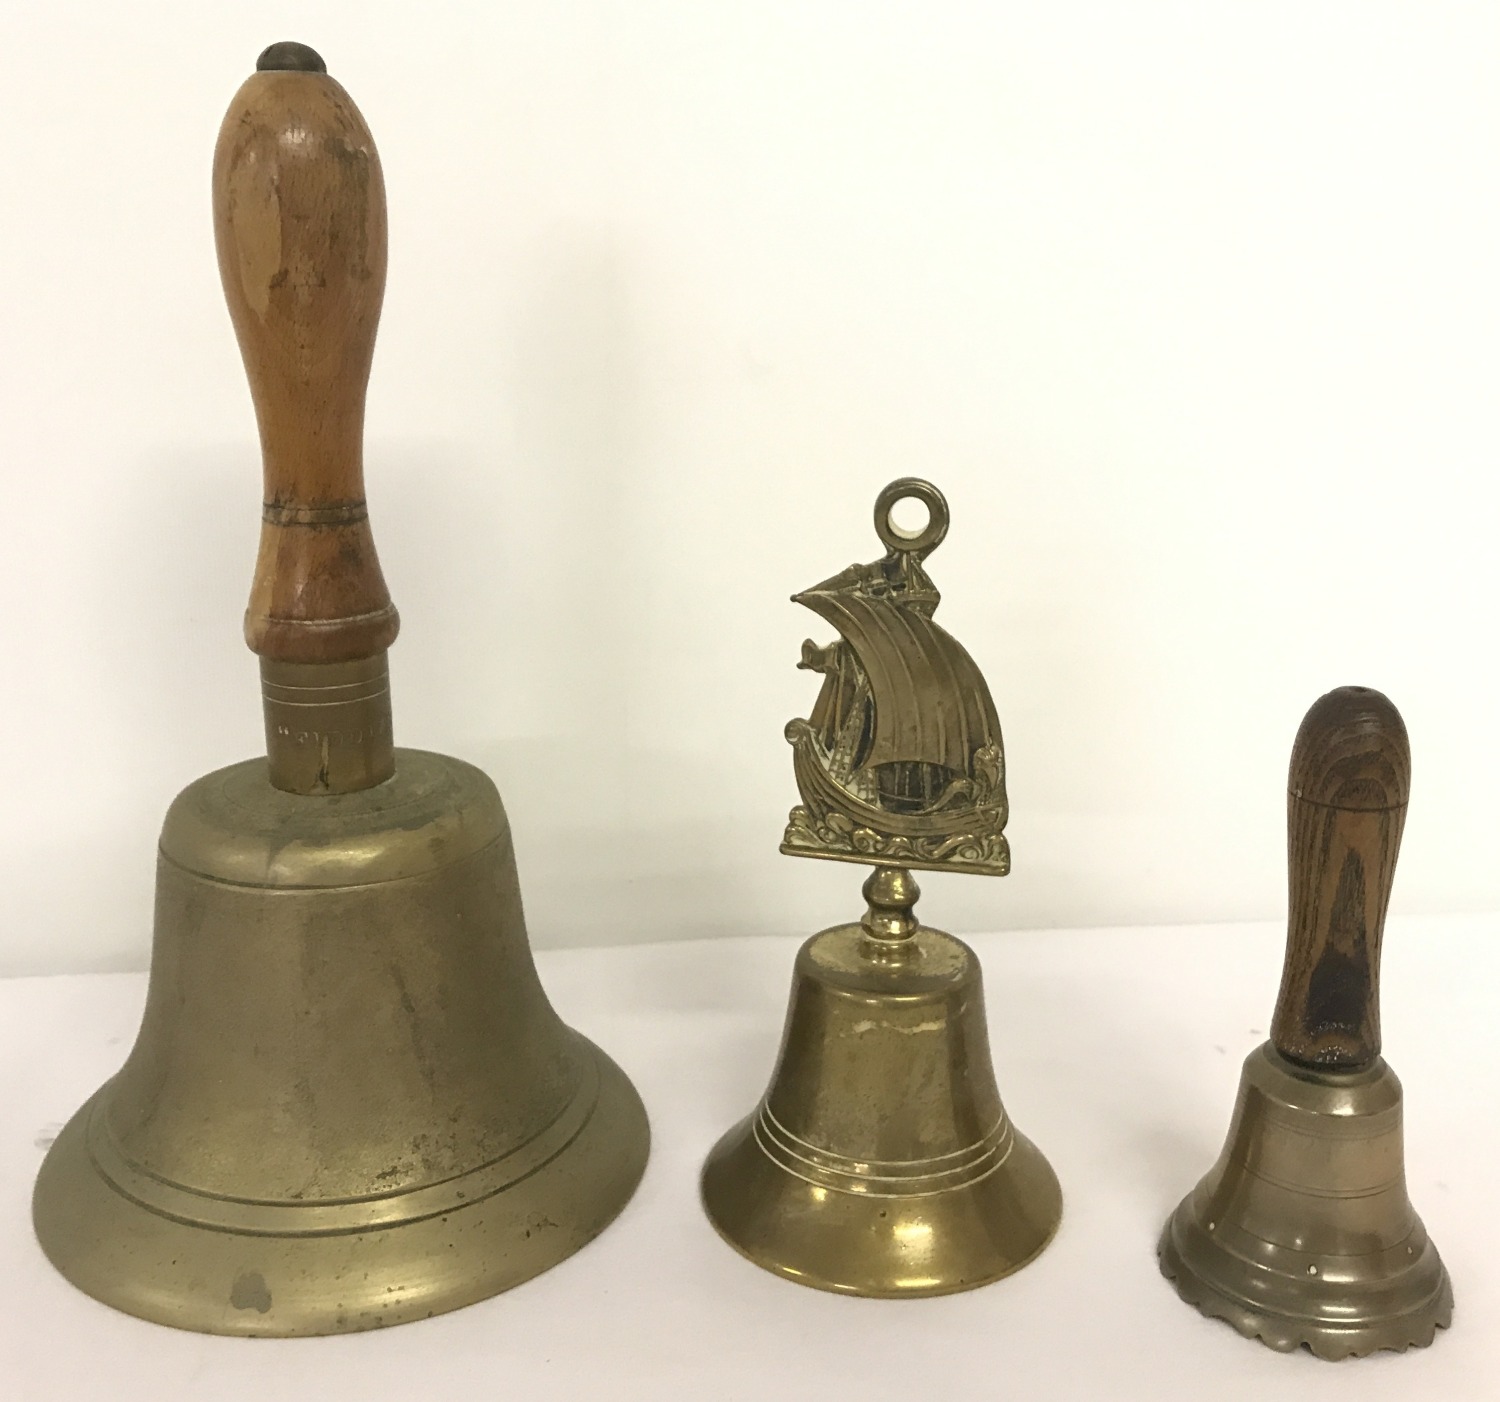 Three brass hand bells of varying sizes, 2 with wooden handles.